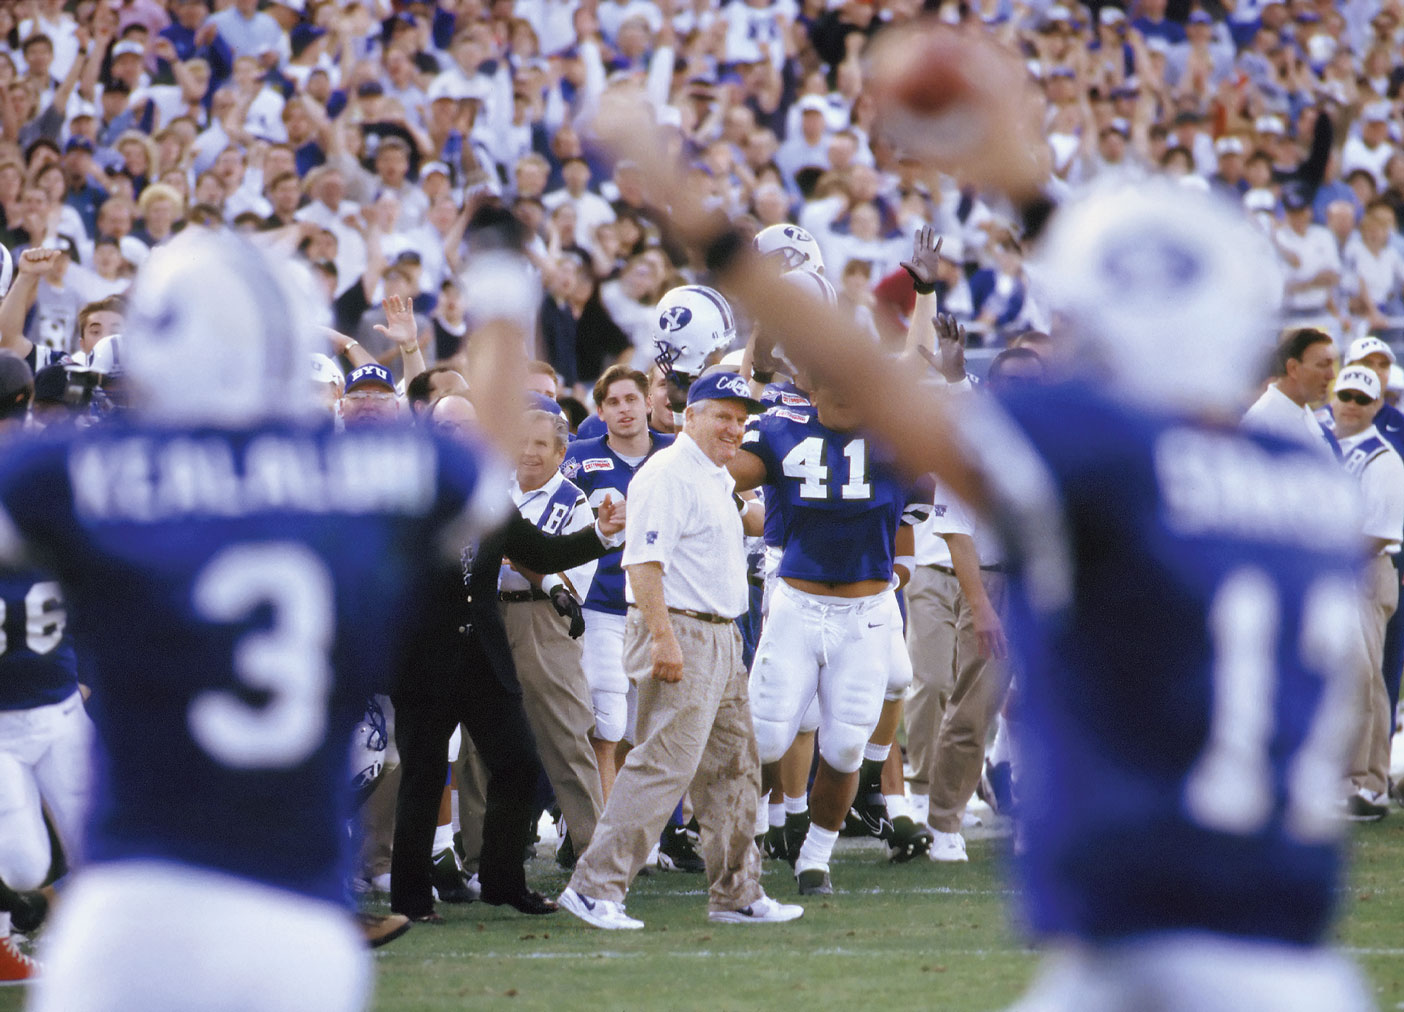 After the Cotton Bowl victory in 1996, an exultant team celebrates around Coach R. LaVell Edwards.